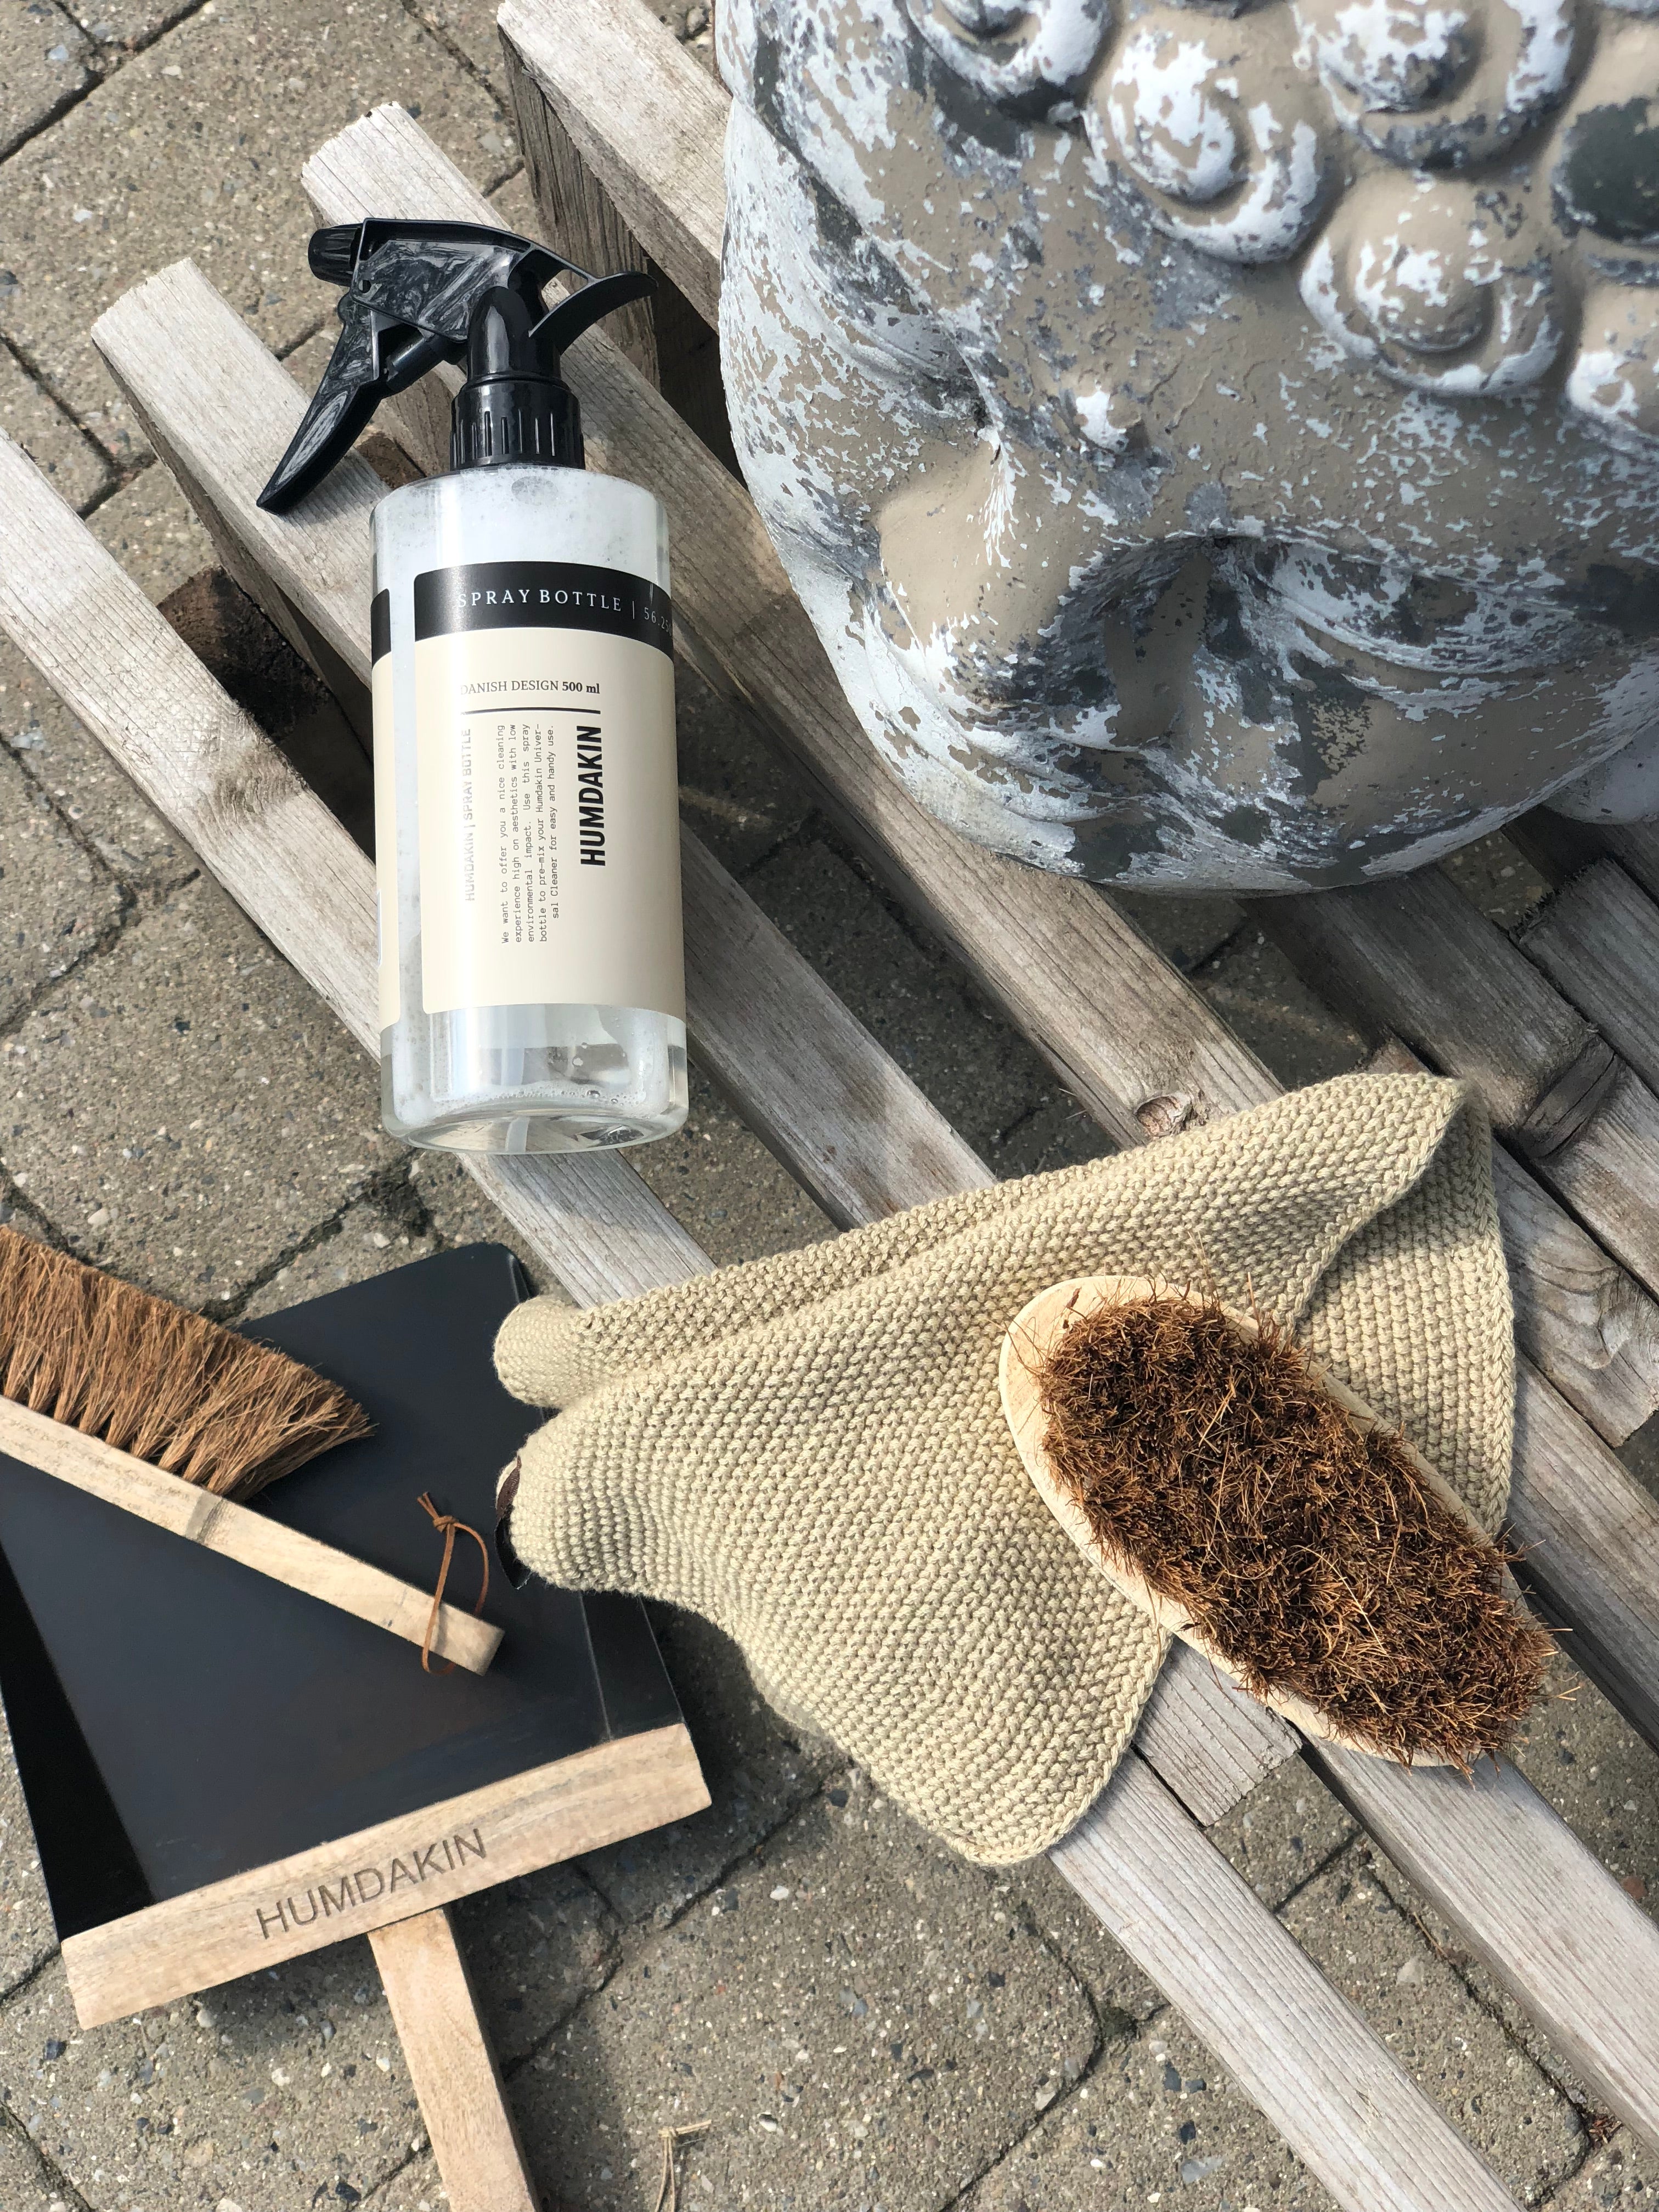 Outdoor cleaning and styling